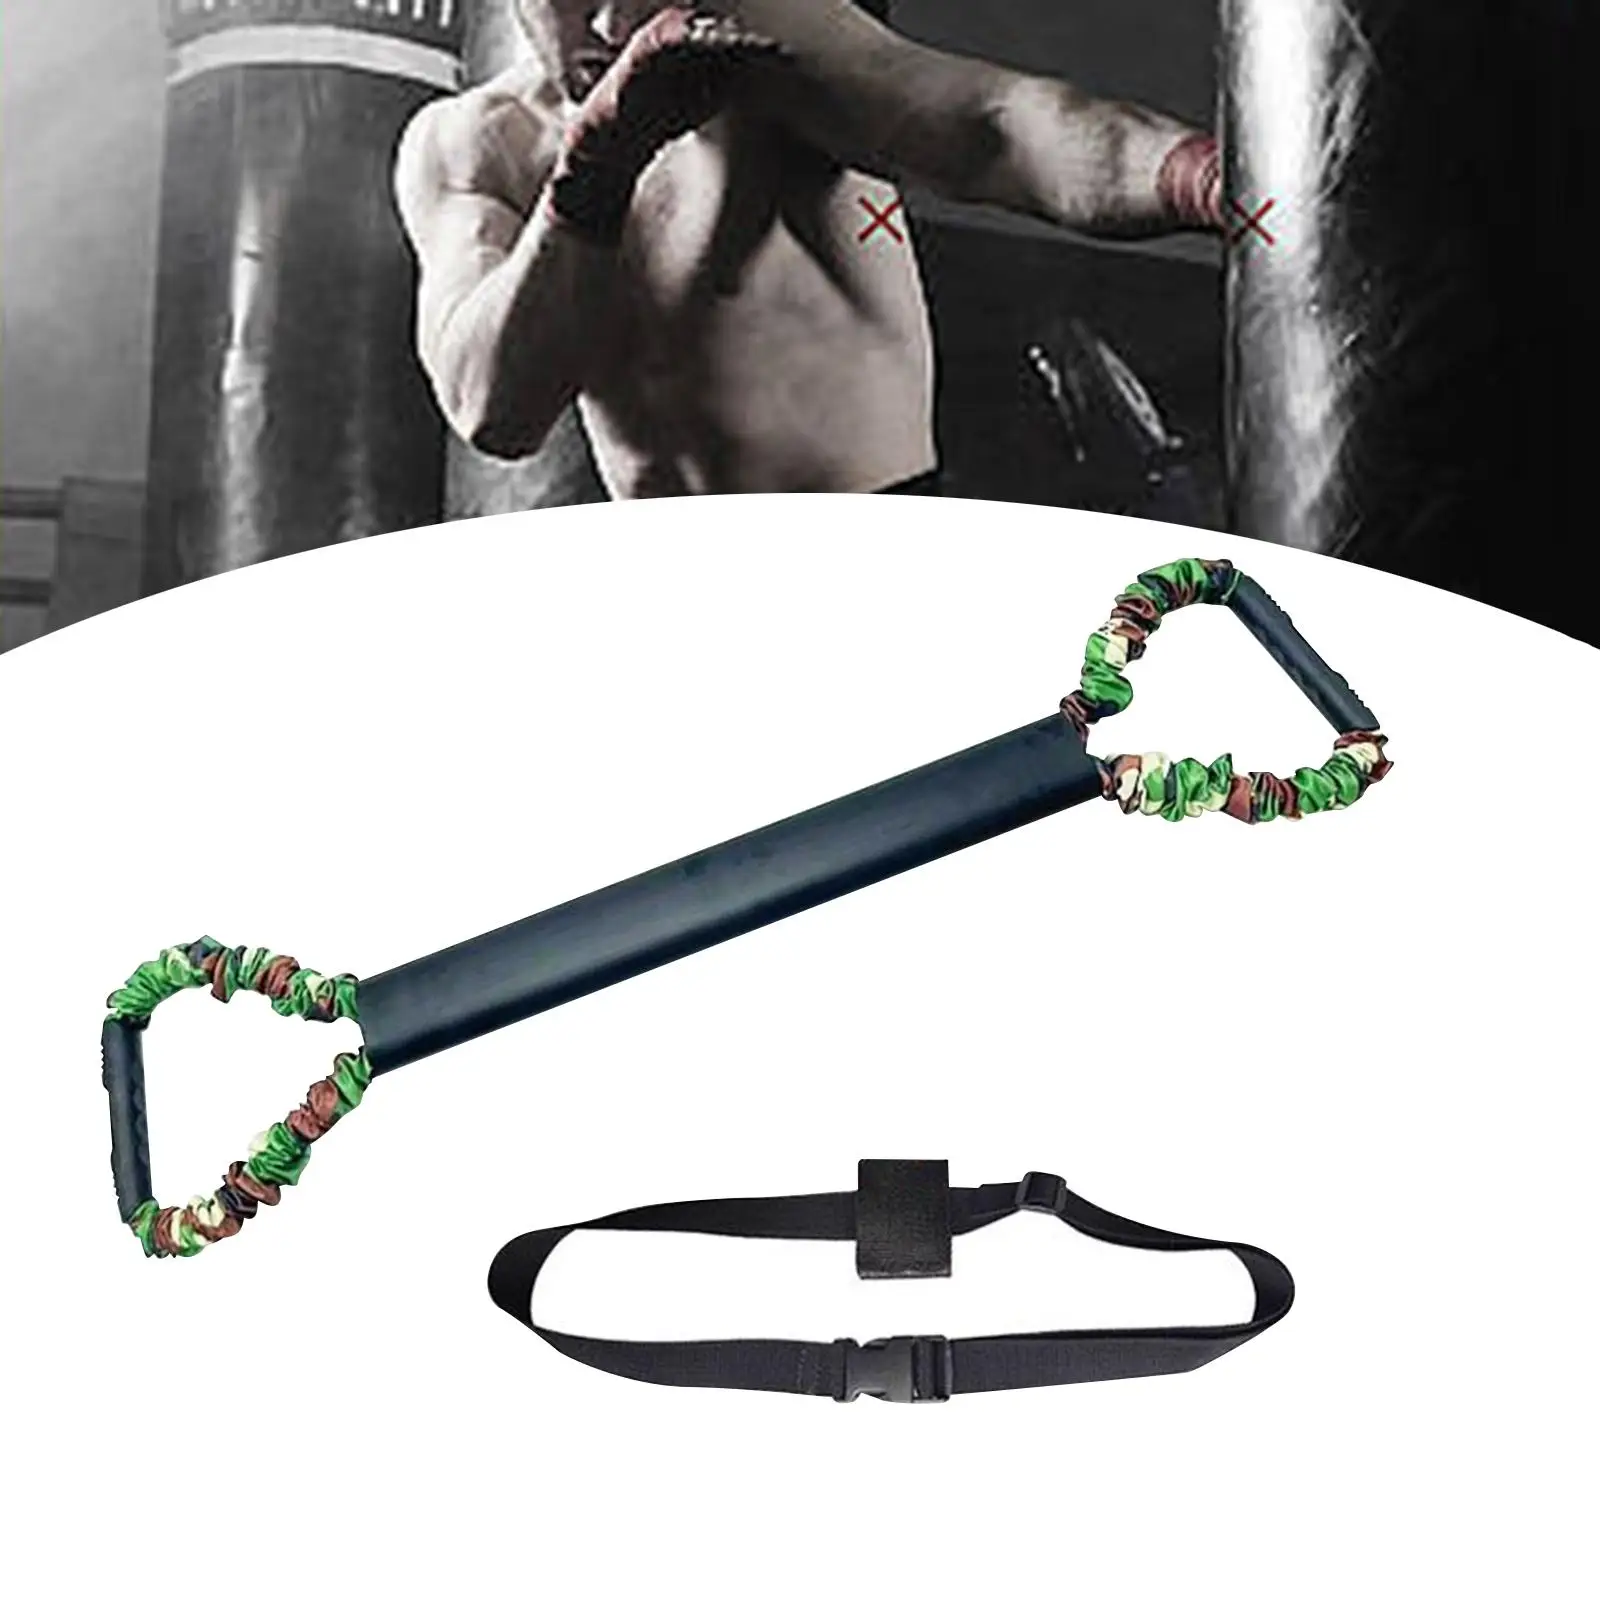 Pulling Rope Fitness Exercise Band Boxing Resistance Band for Legs Arm Pilates Punching Powers Speed Agility Training Basketball